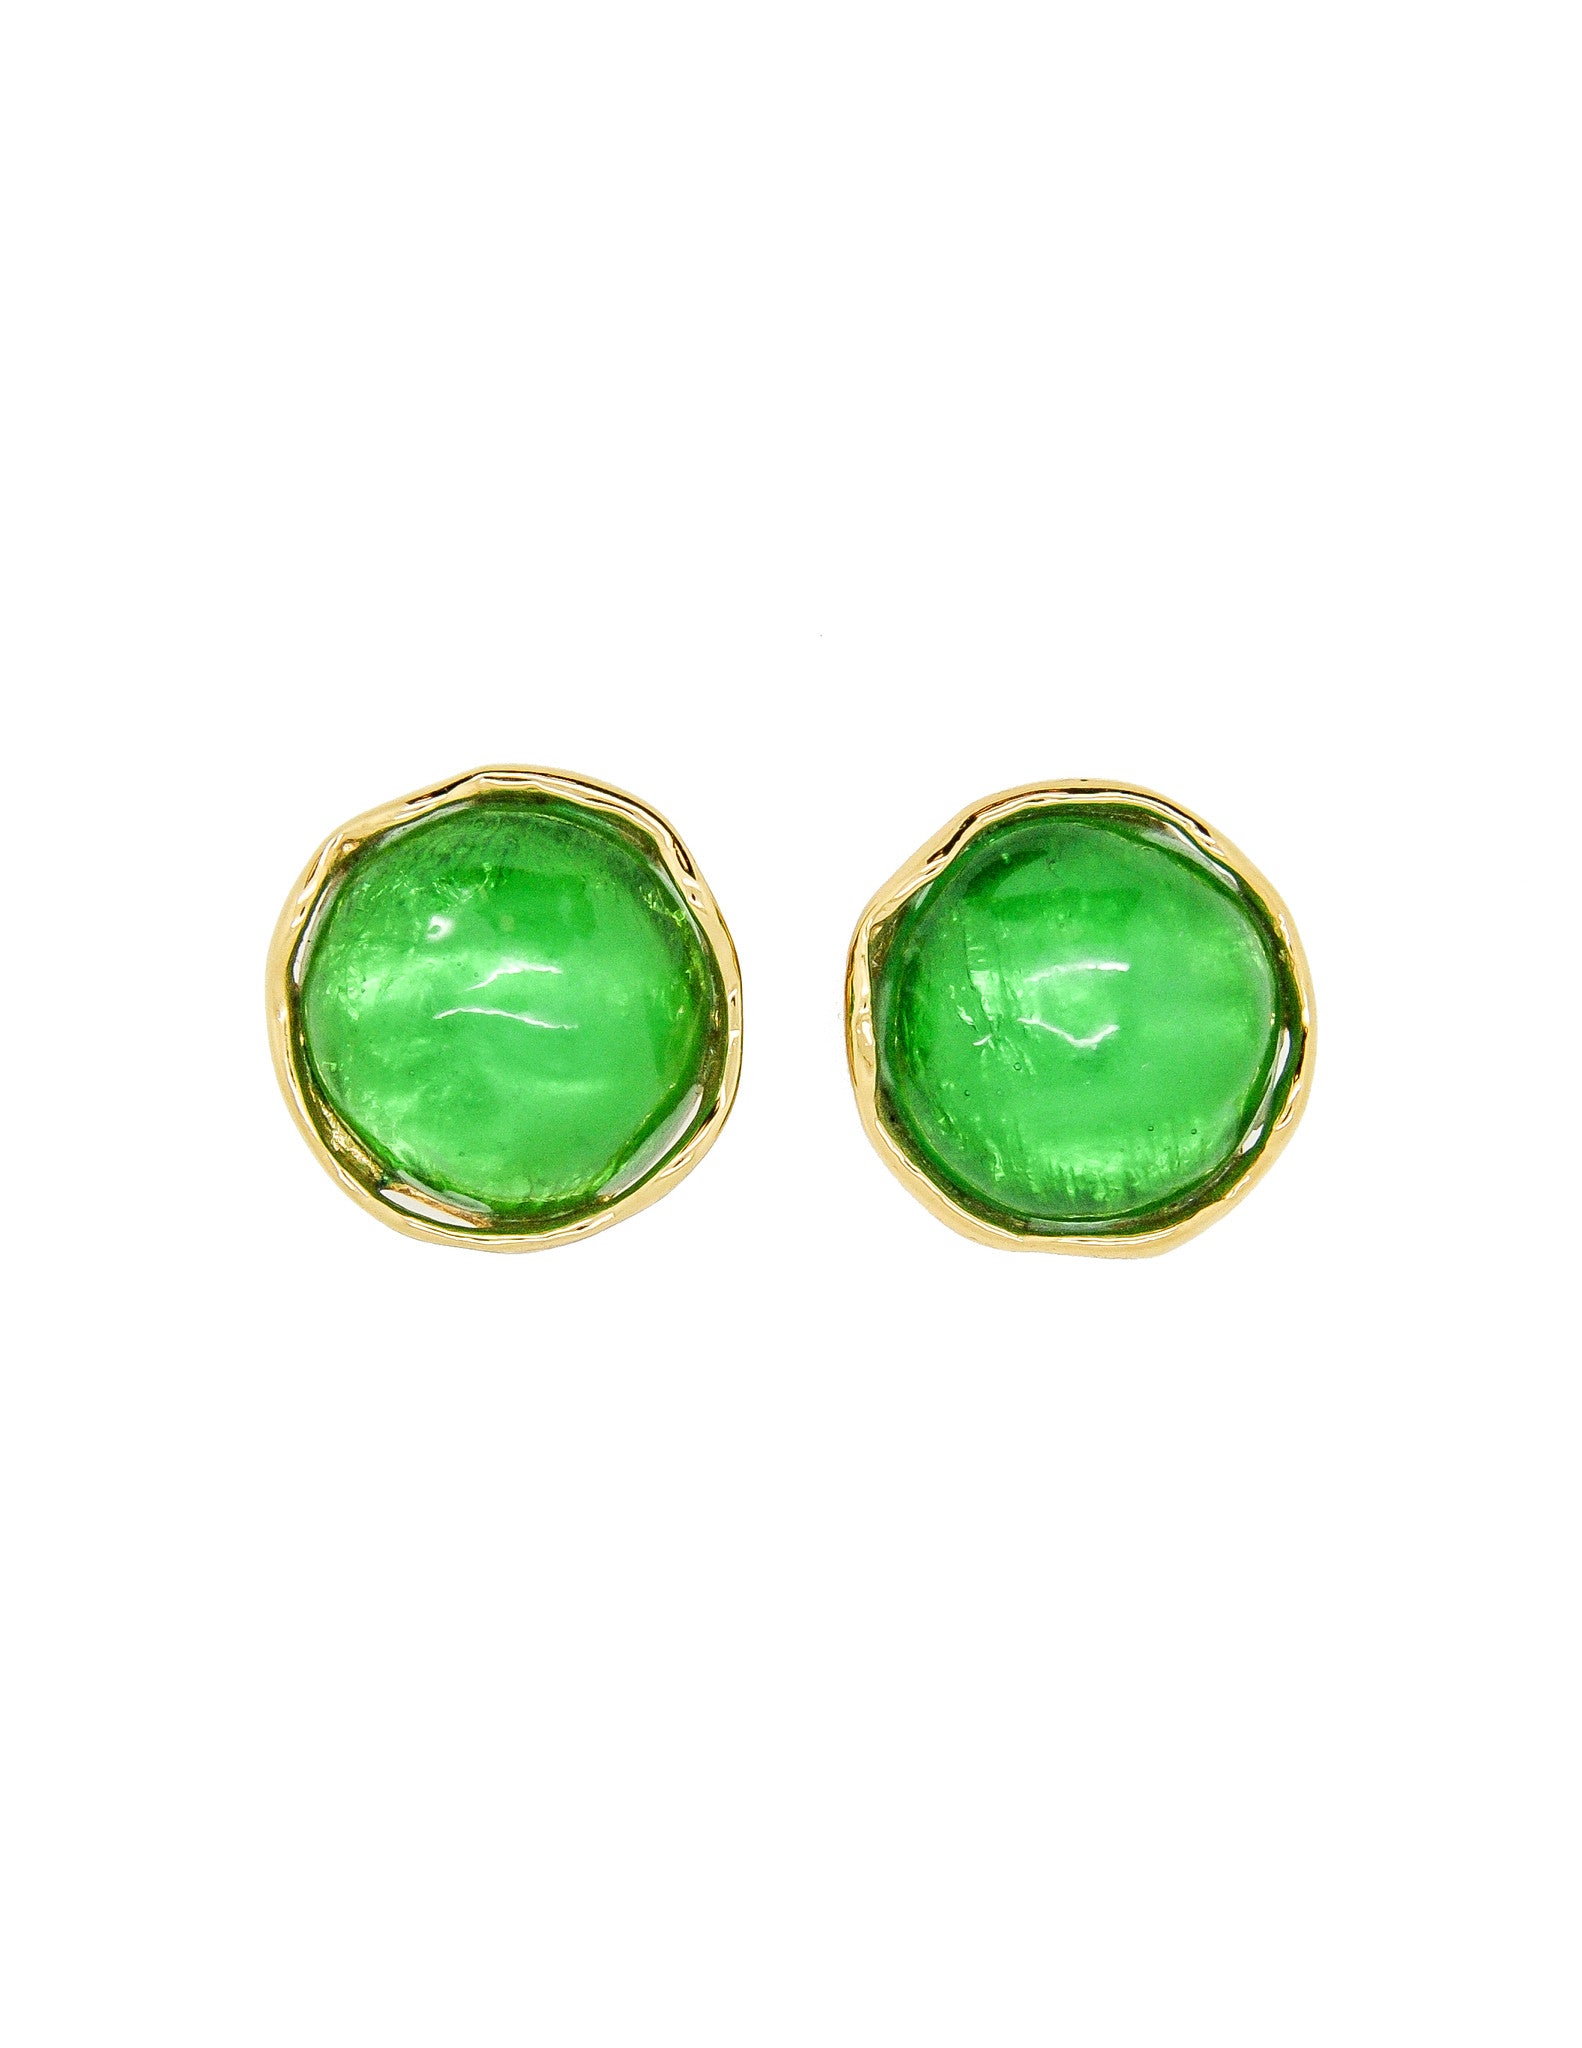 YSL Vintage Green Gripoix Glass and Gold Earrings - Amarcord Vintage Fashion
 - 1